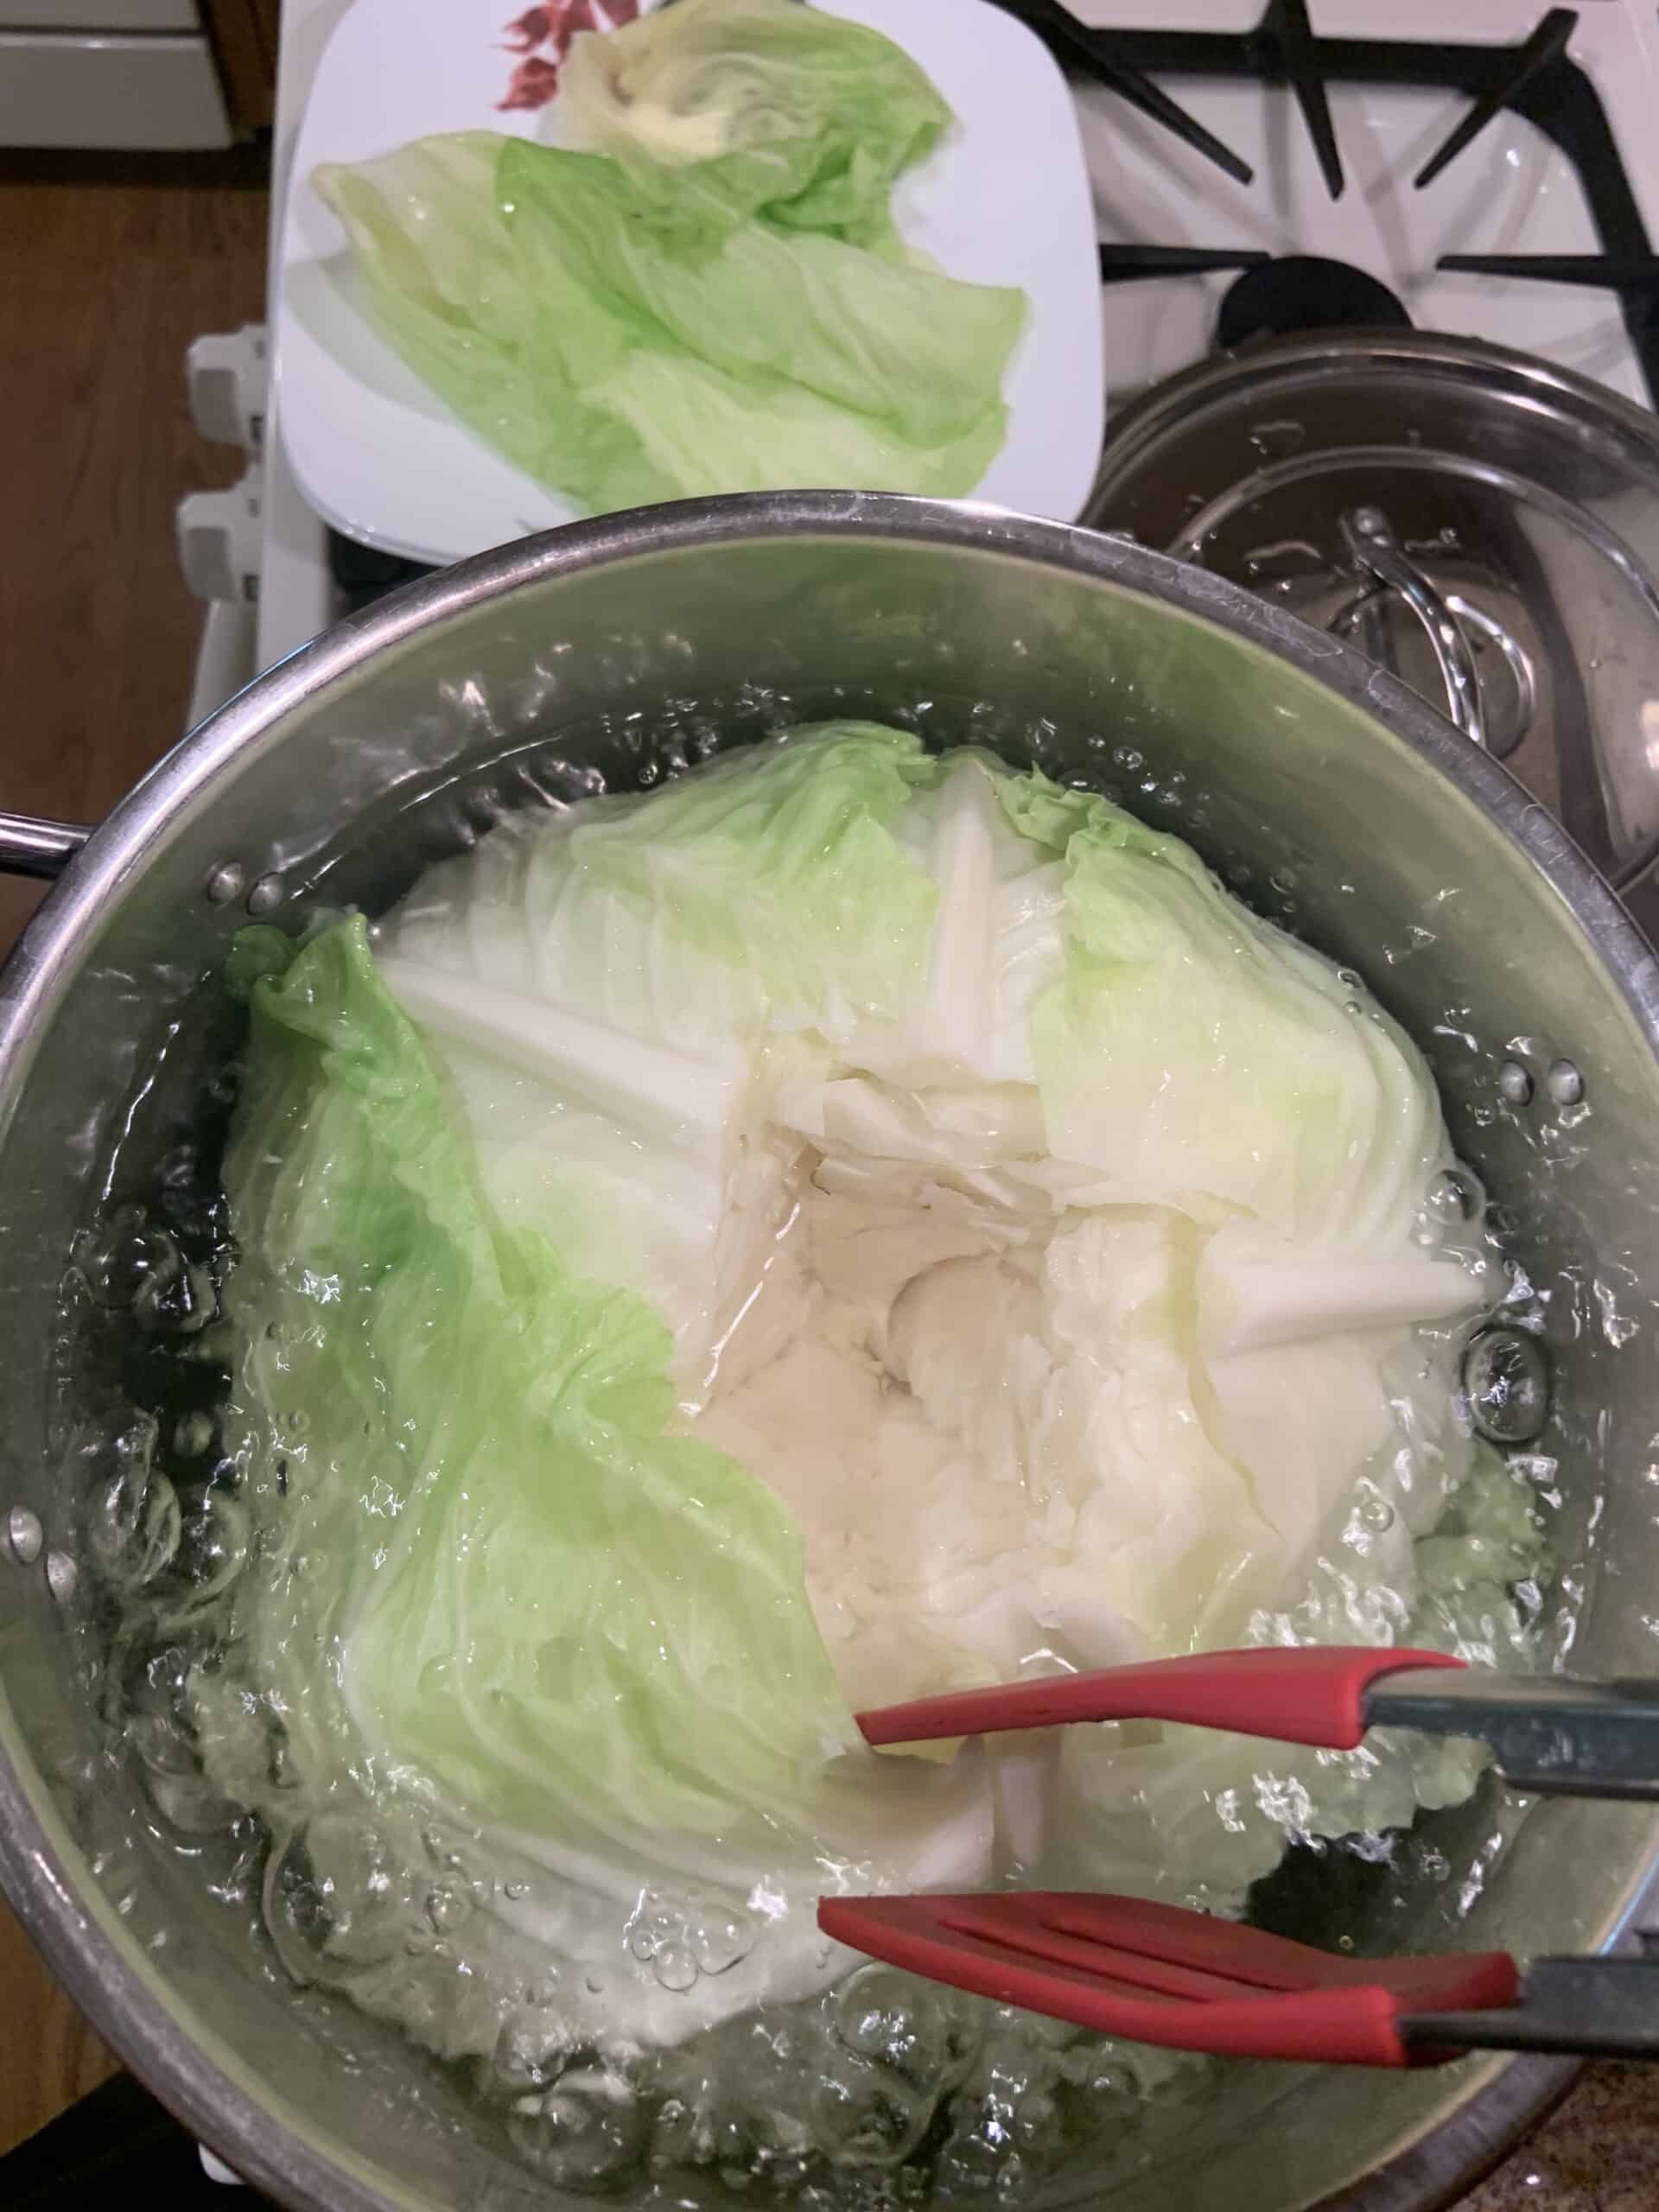 Peeling leaves off of the cabbage head while in the pot of boiling water.